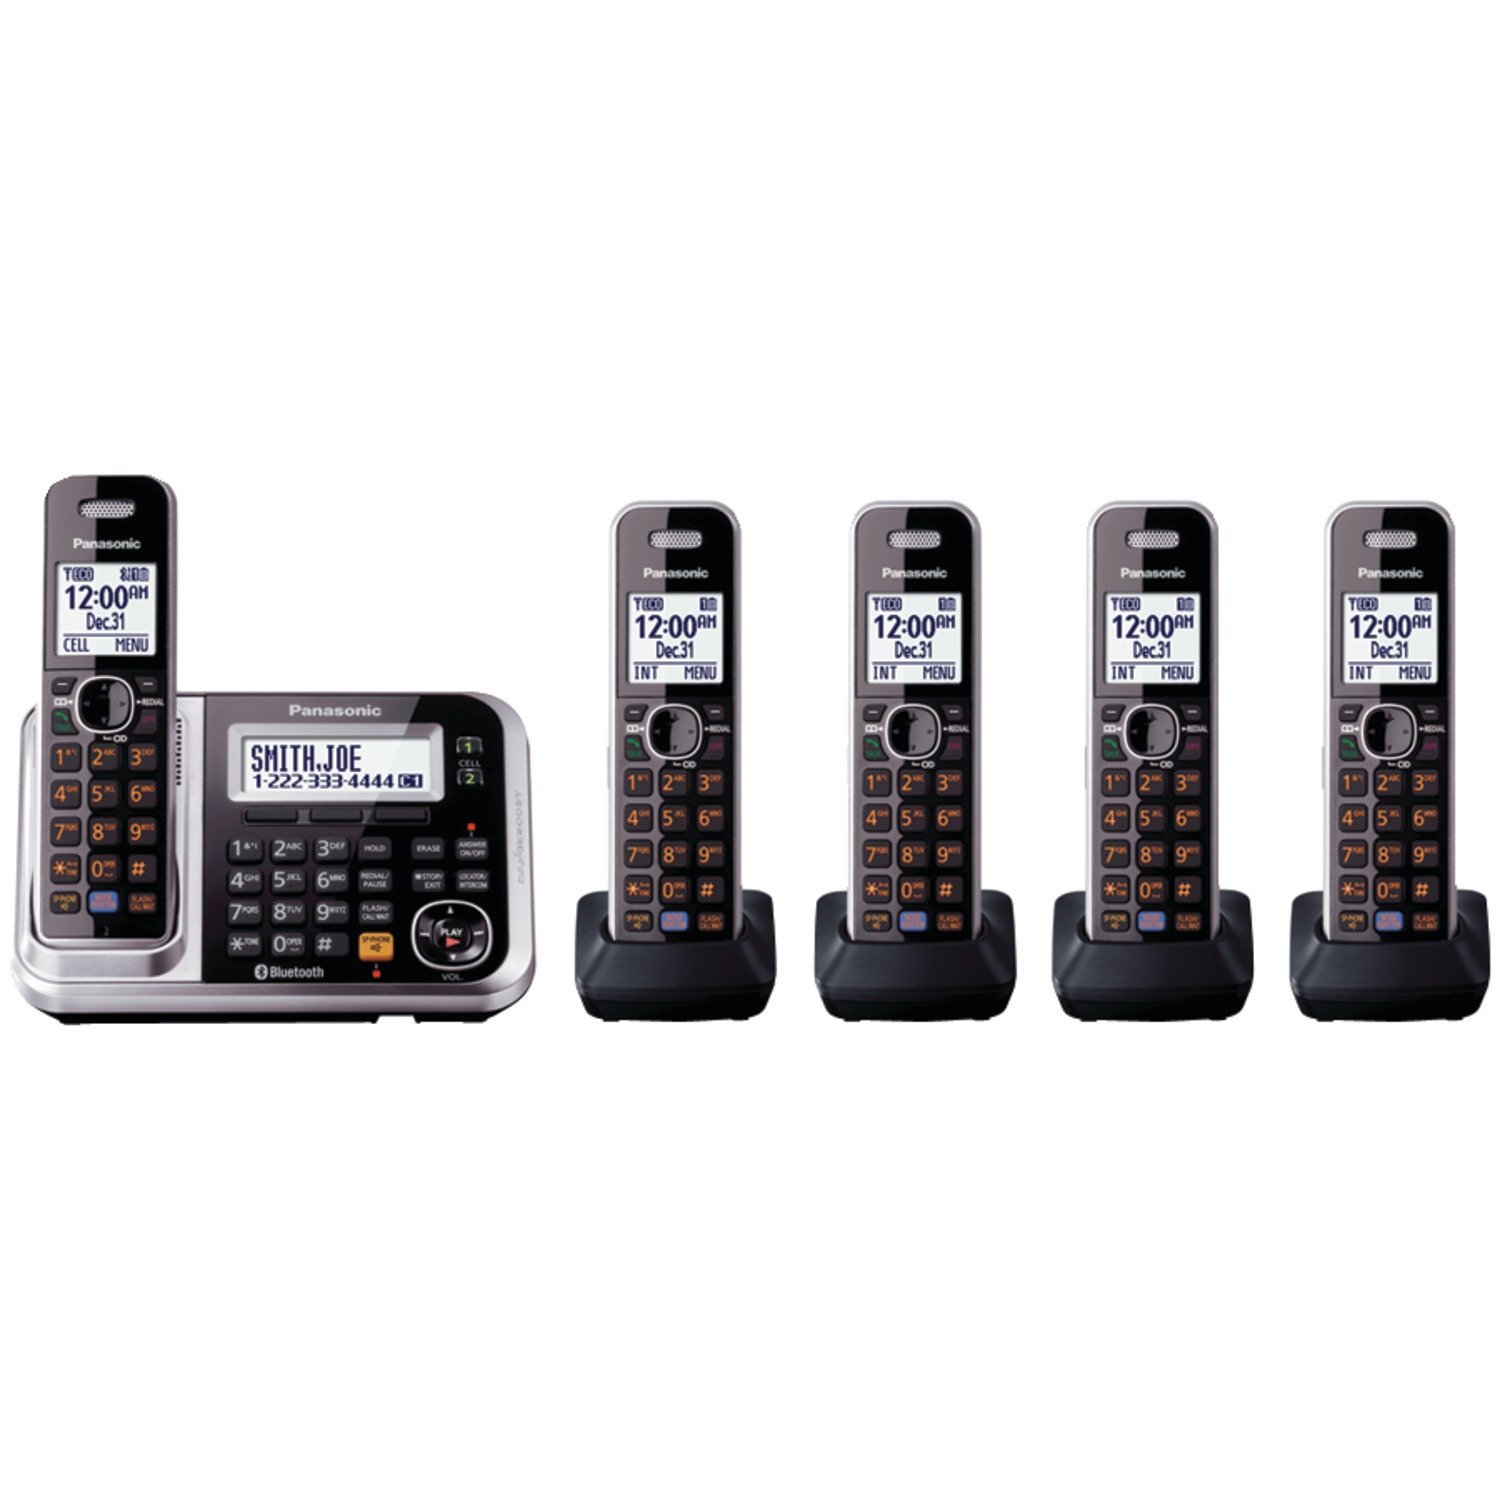 Panasonic Link2Cell KX-TG7875S DECT 6.0 1-Line Bluetooth Cordless Phone with Enhanced Noise Reduction & Digital Answering Machine - 5 Handsets, Black/Silver